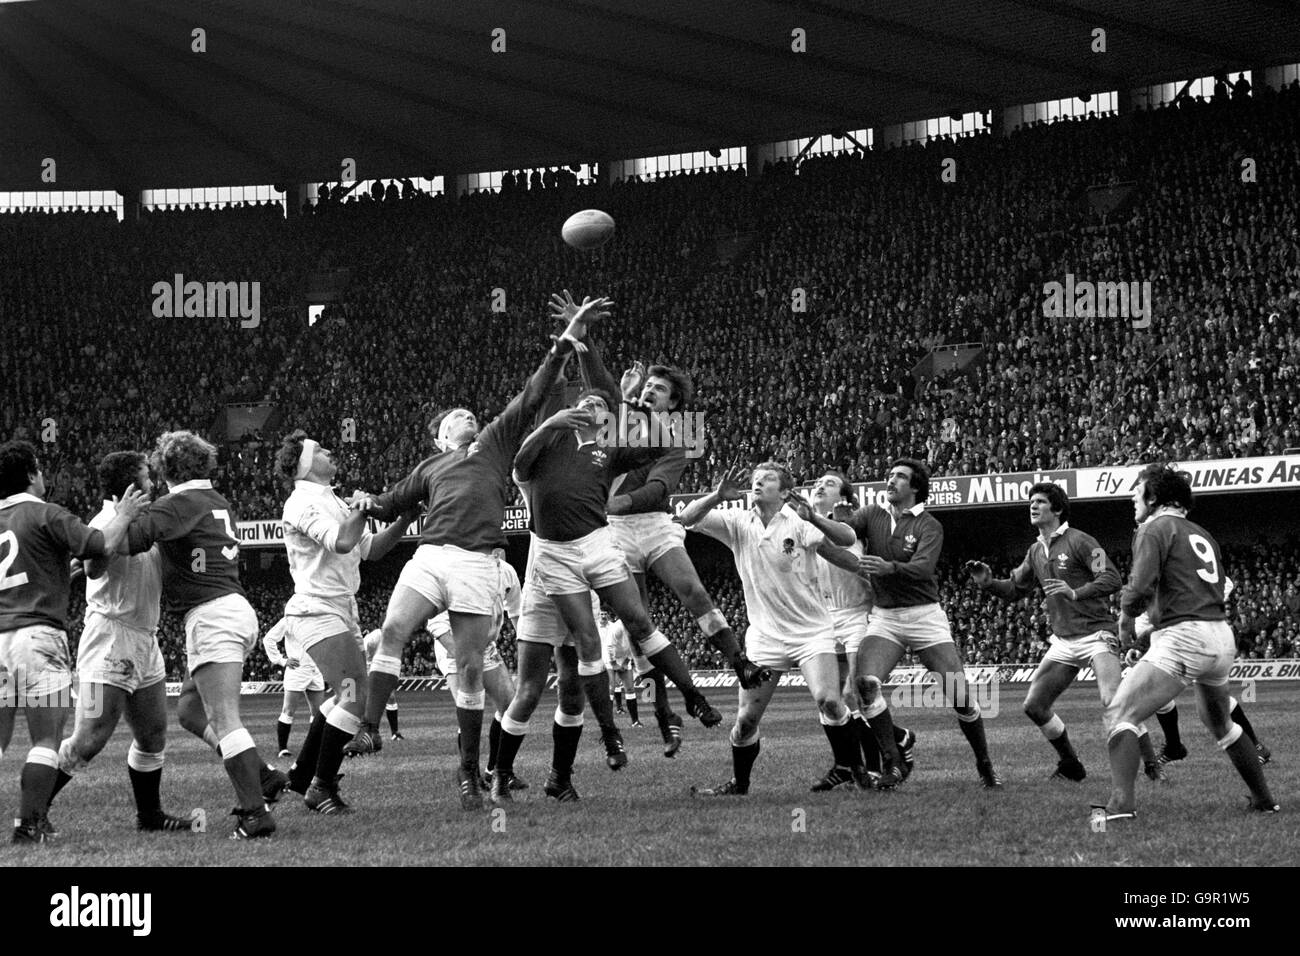 The Welsh trio of (L-R) Geoff wheel, Clive Davis and Ian Stephens outjump England in a line-out, while England captain Billy Beaumont (l) and team mate Mike Rafter (r) are the spectators. Wales went on to beat last season's Grand Slam champions by 21 points to nineteen. Stock Photo